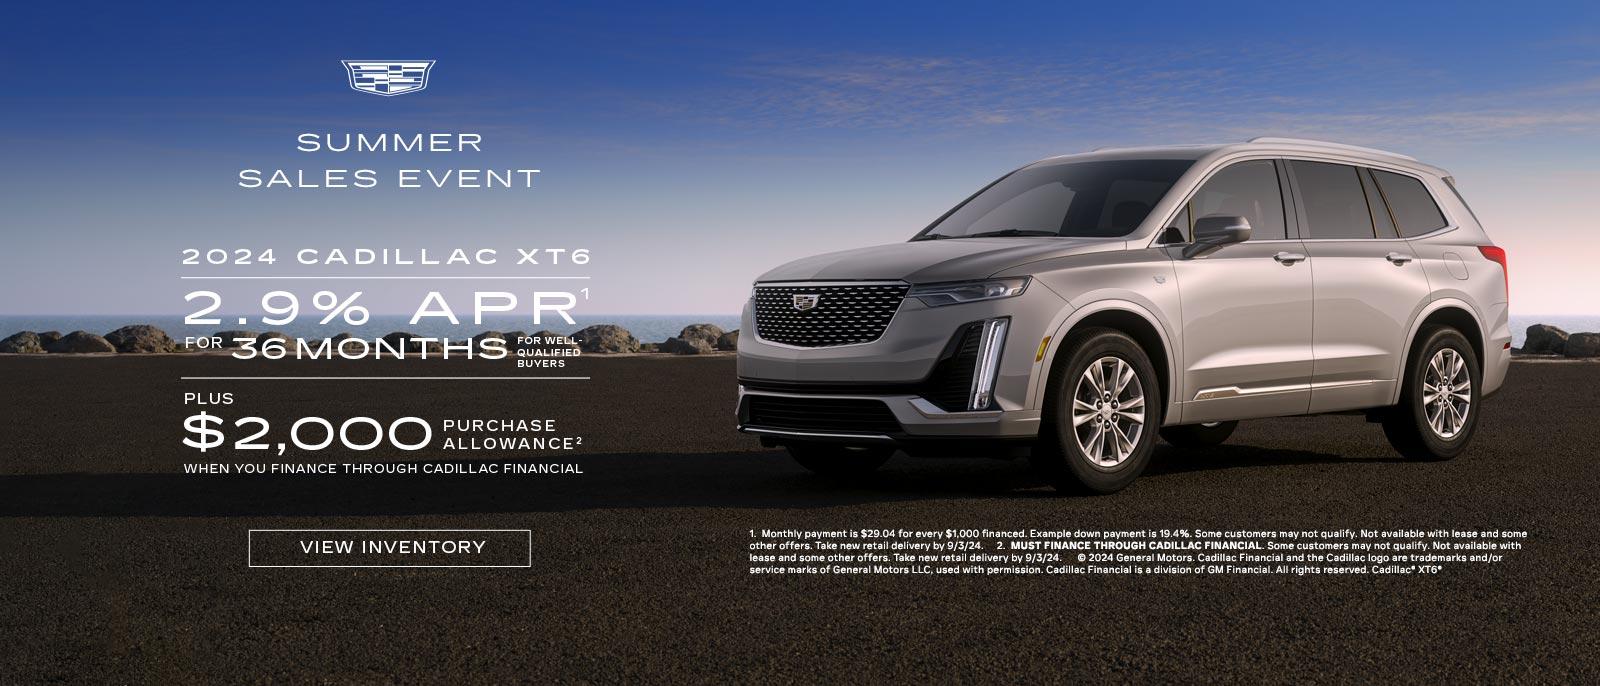 2024 Cadillac XT6. 2.9% APR for 36 months. Plus $2,000 purchase allowance.